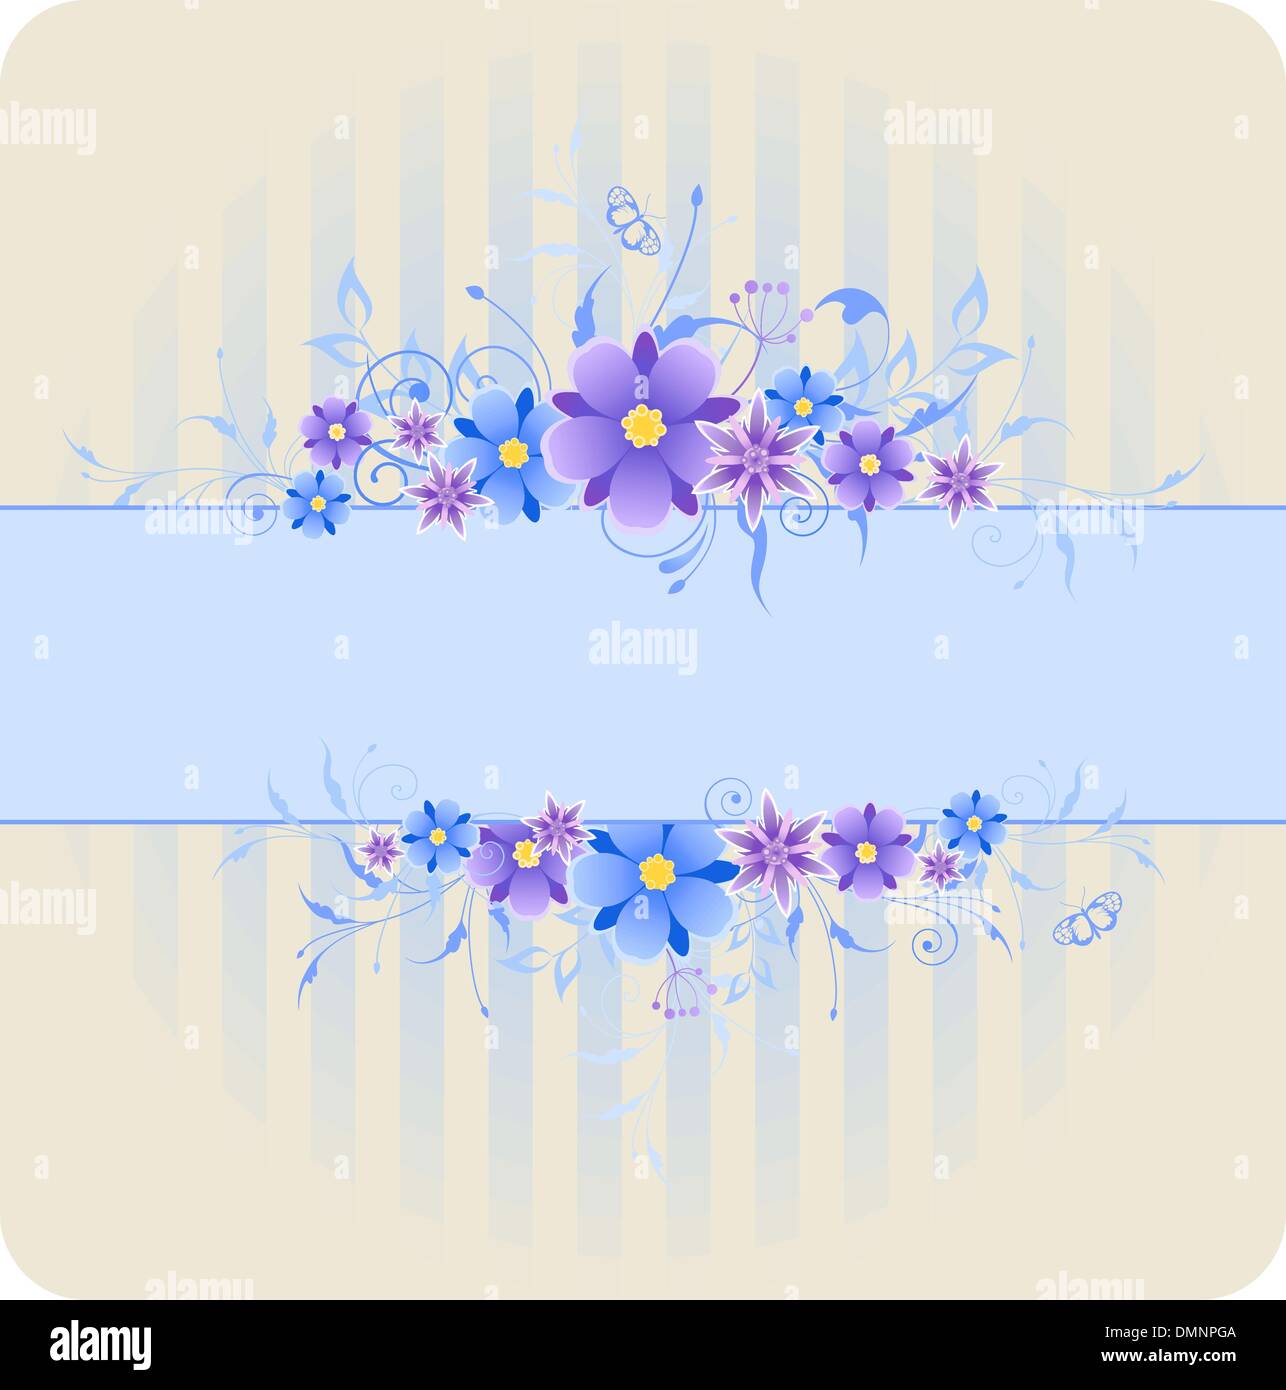 background with violet and blue flowers Stock Vector